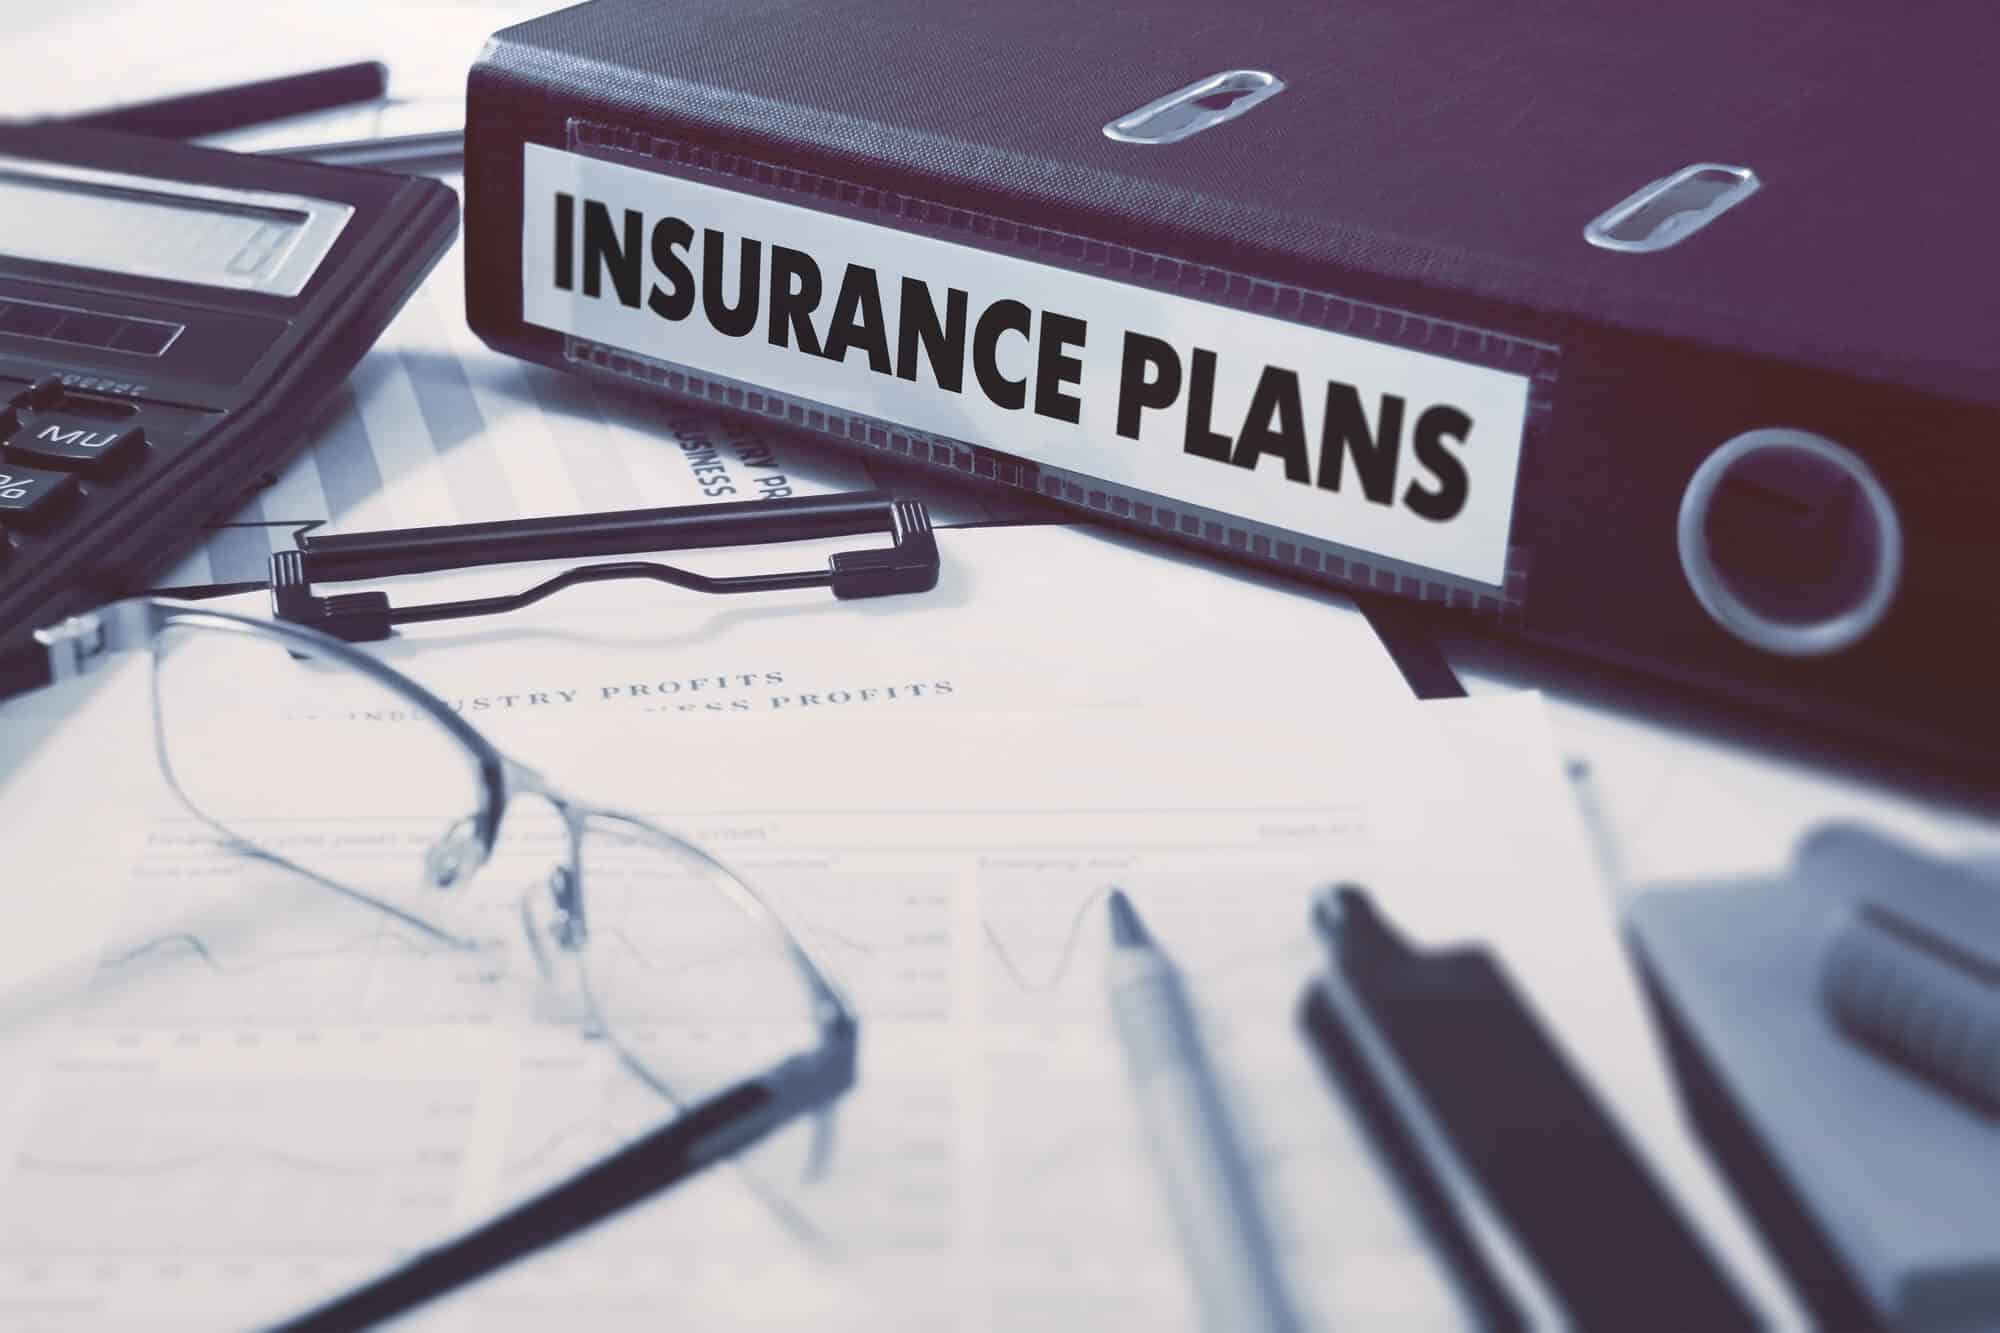 insurance plans book and insurance agency consulting